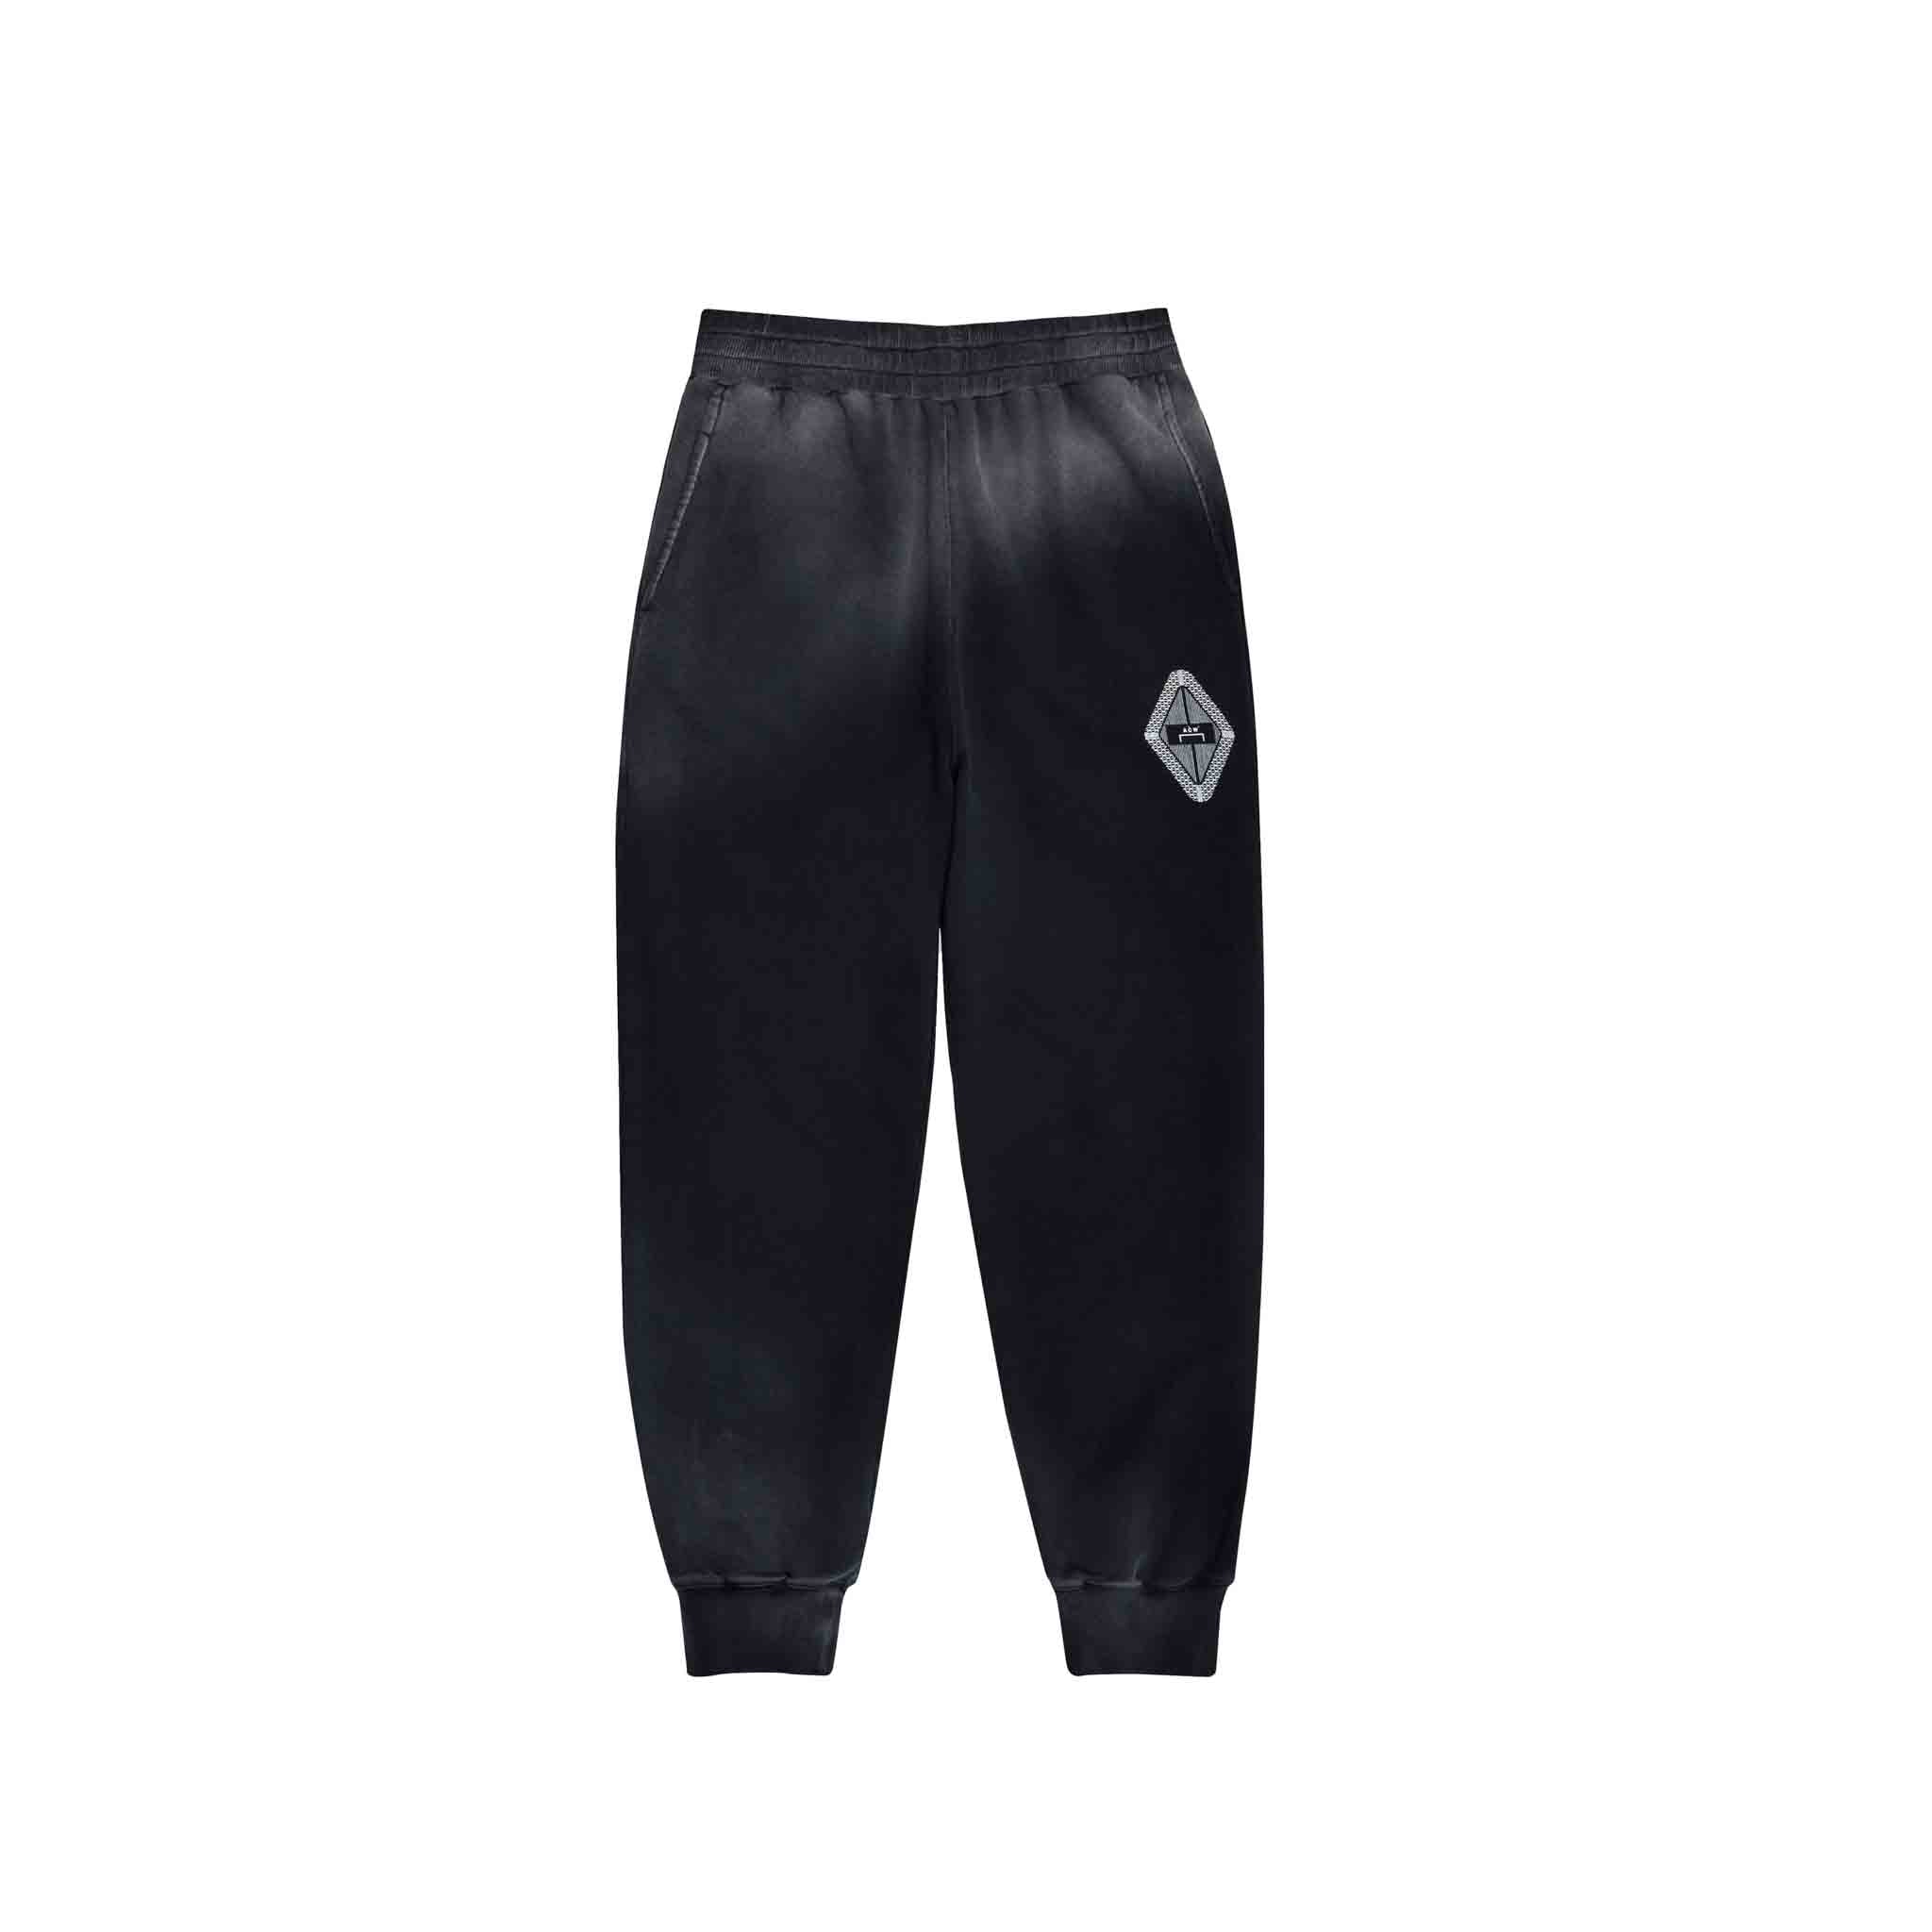 A-COLD-WALL* Vertex Jersey Pant in Black